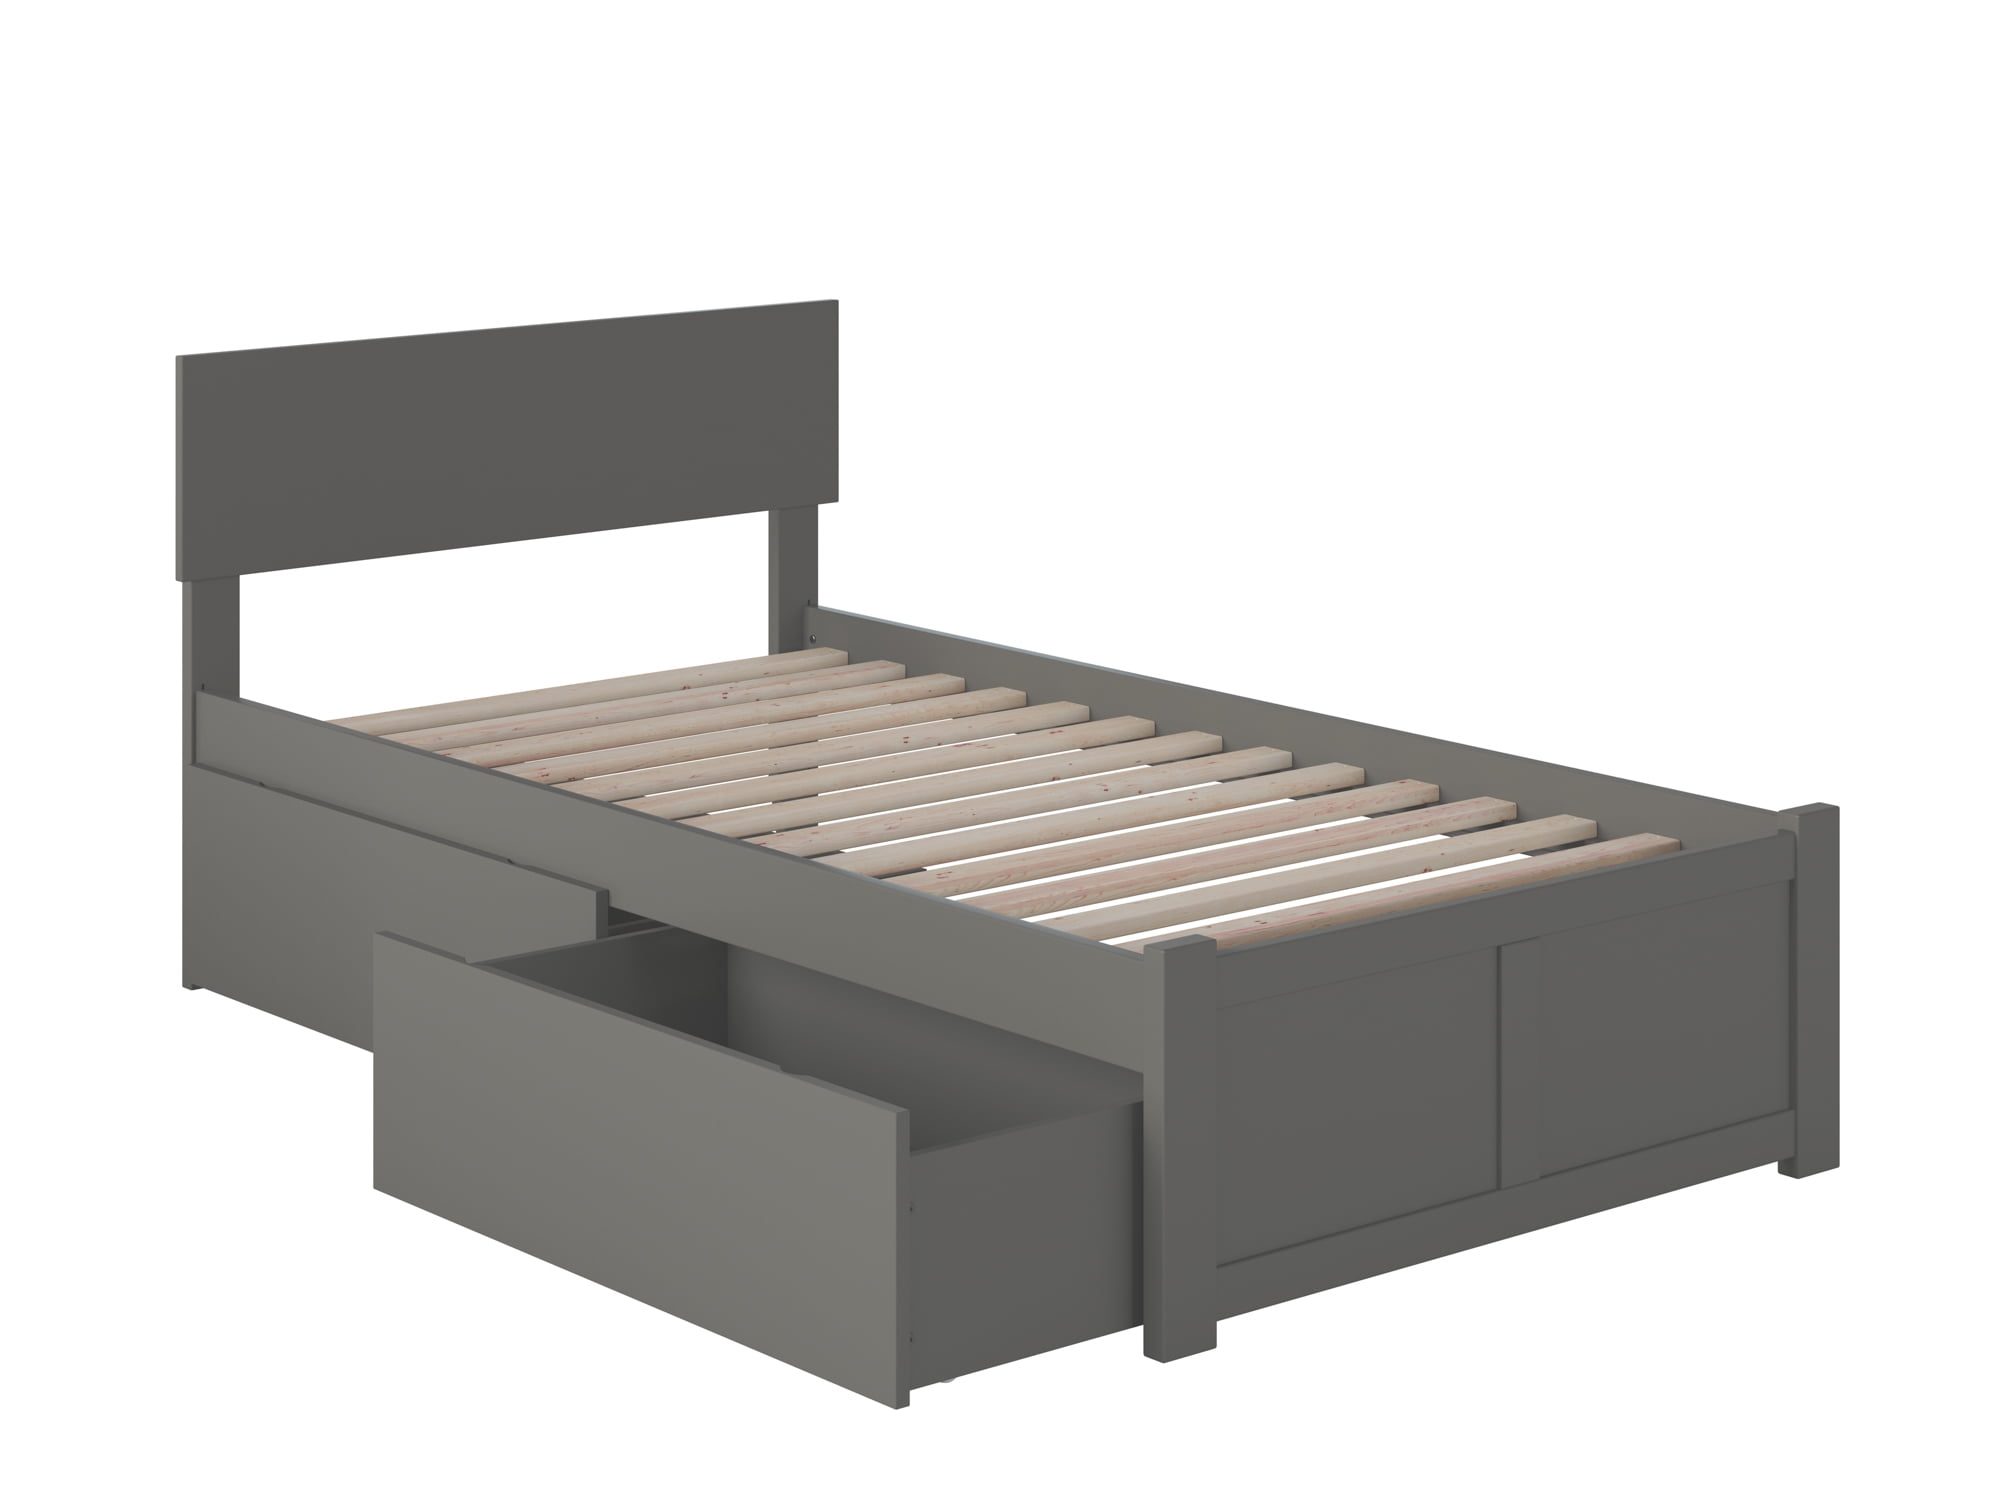 Ar8112119 Orlando Twin Extra Large Platform Bed With Flat Panel Foot Board & 2 Urban Bed Drawers - Grey